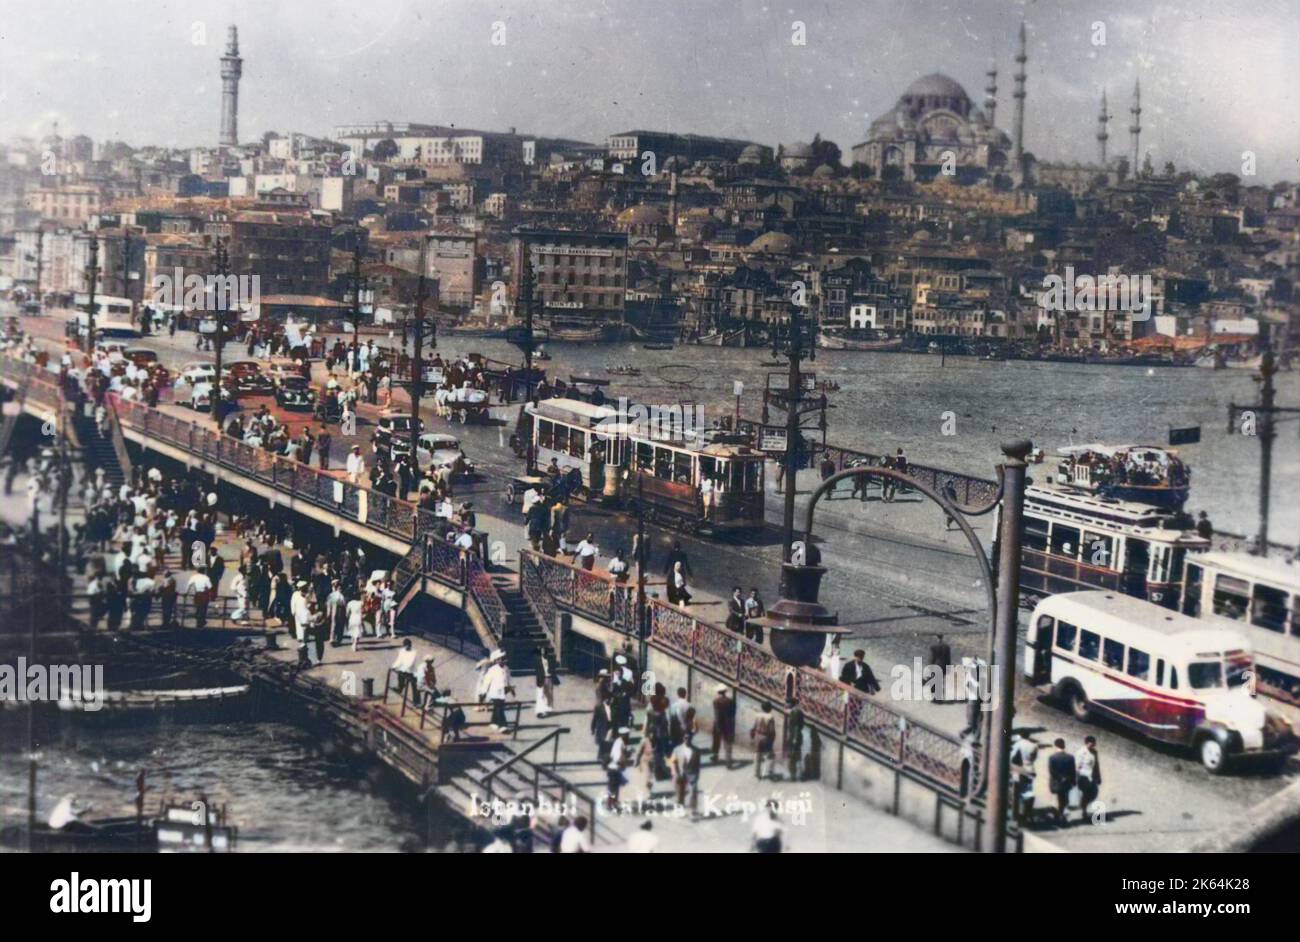 A view across the Galata Bridge and Golden Horn, with motorbuses, trams, cars and pedestrians packing the crossing. Stock Photo